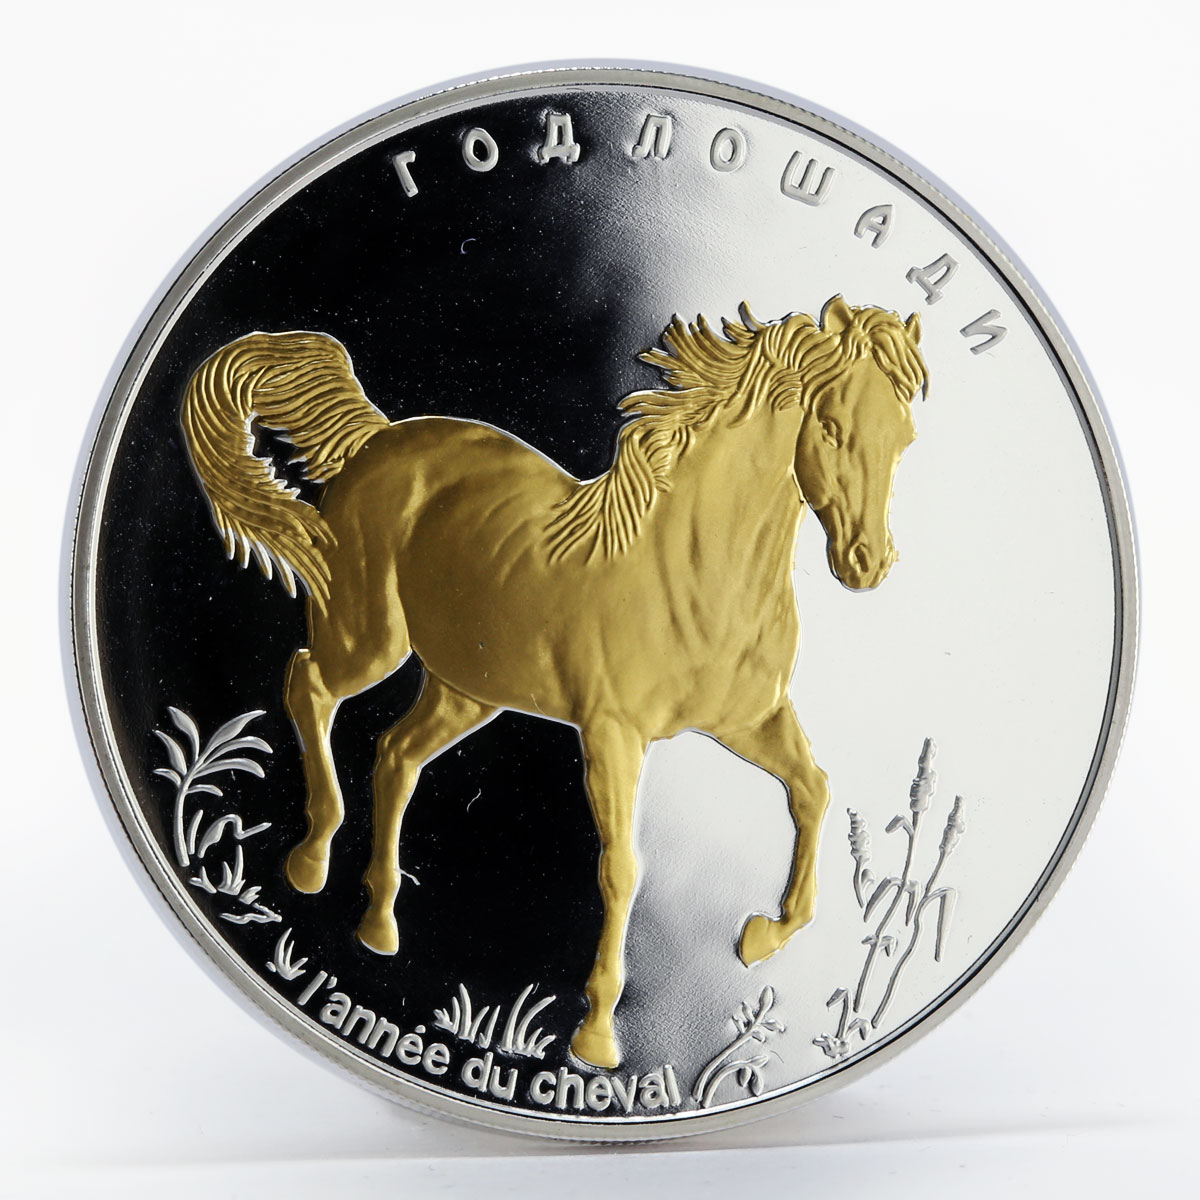 Togo 1000 francs Year of the Horse gilded proof silver coin 2014